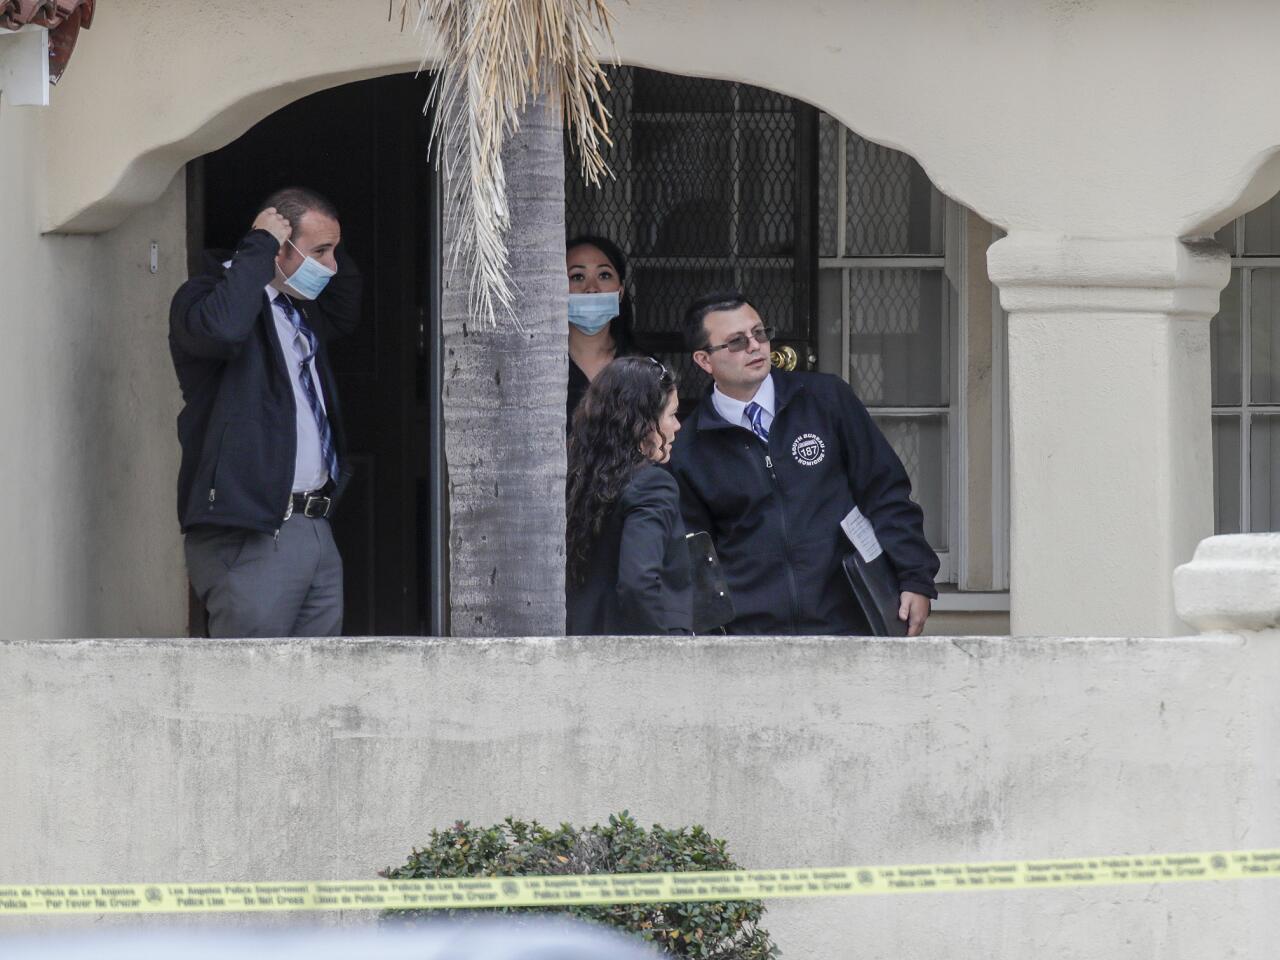 An investigation is underway by the Los Angeles Police Department's Southwest Division after the bodies of three people were found in a home in Leimert Park in the 3900 block of South Bronson Avenue.